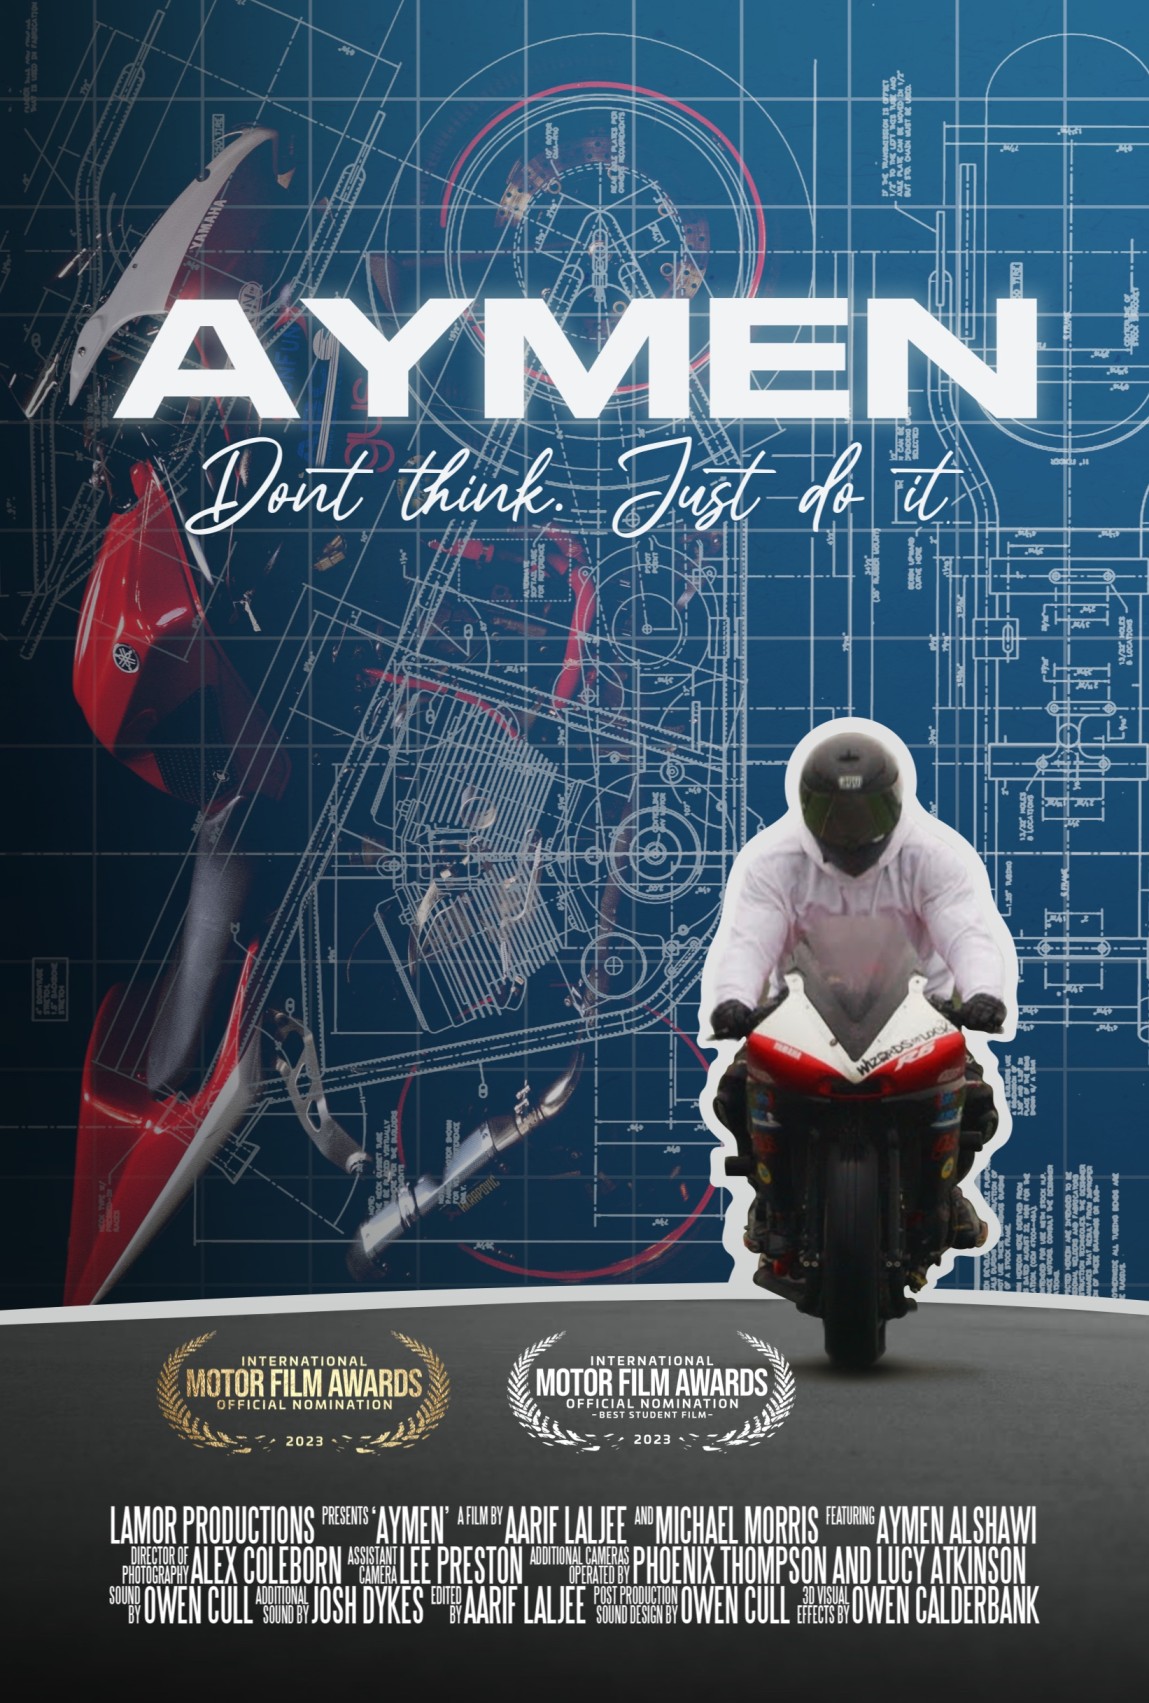 The poster for Aymen Don't Think Just Do It